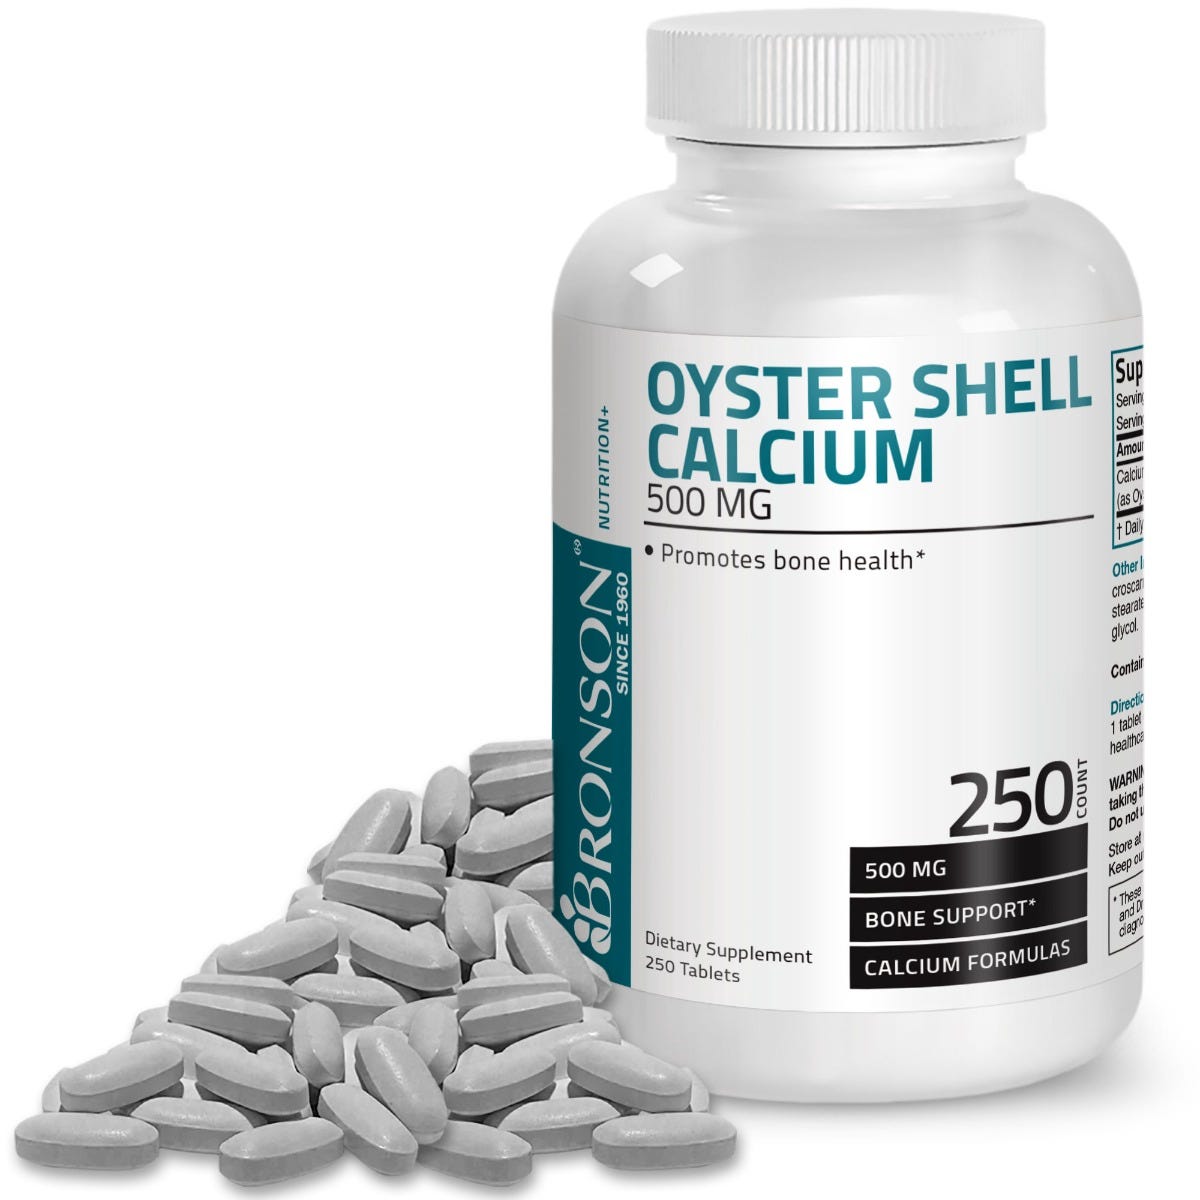 Oyster Shell Calcium - 500 mg - 250 Tablets view 3 of 7